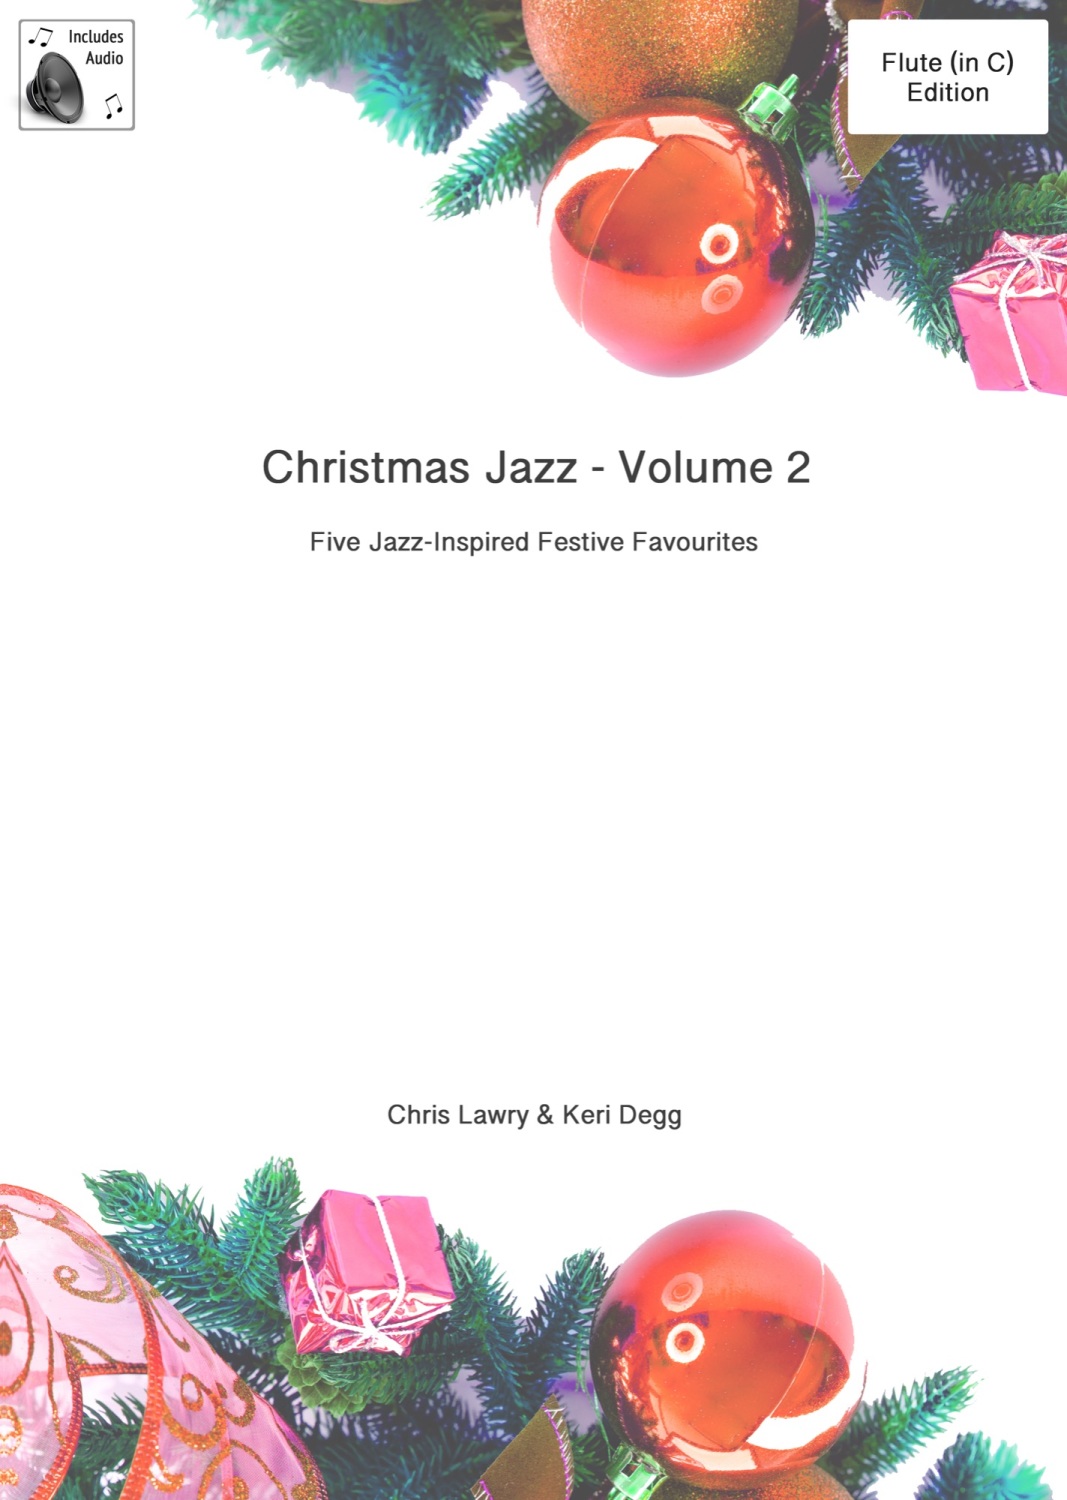 Christmas Jazz for Flute & Piano Volume 2. Includes audio tracks. 